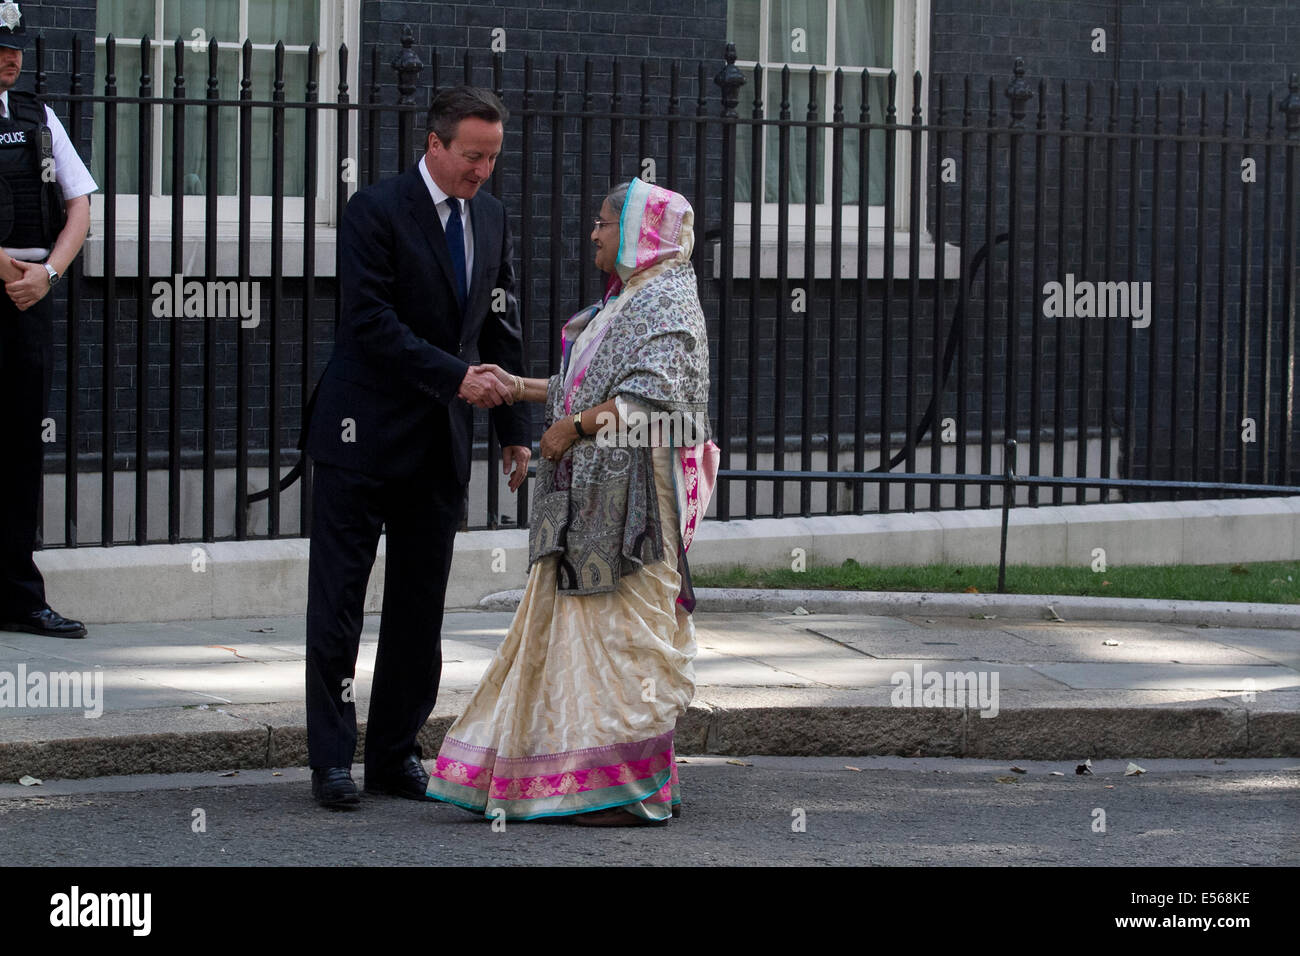 London, UK. 22nd July, 2014. The PM of Bangladesh Sheikh Hasina is greeted by British Prime Minister David Cameron at Downing street London Credit:  amer ghazzal/Alamy Live News Stock Photo